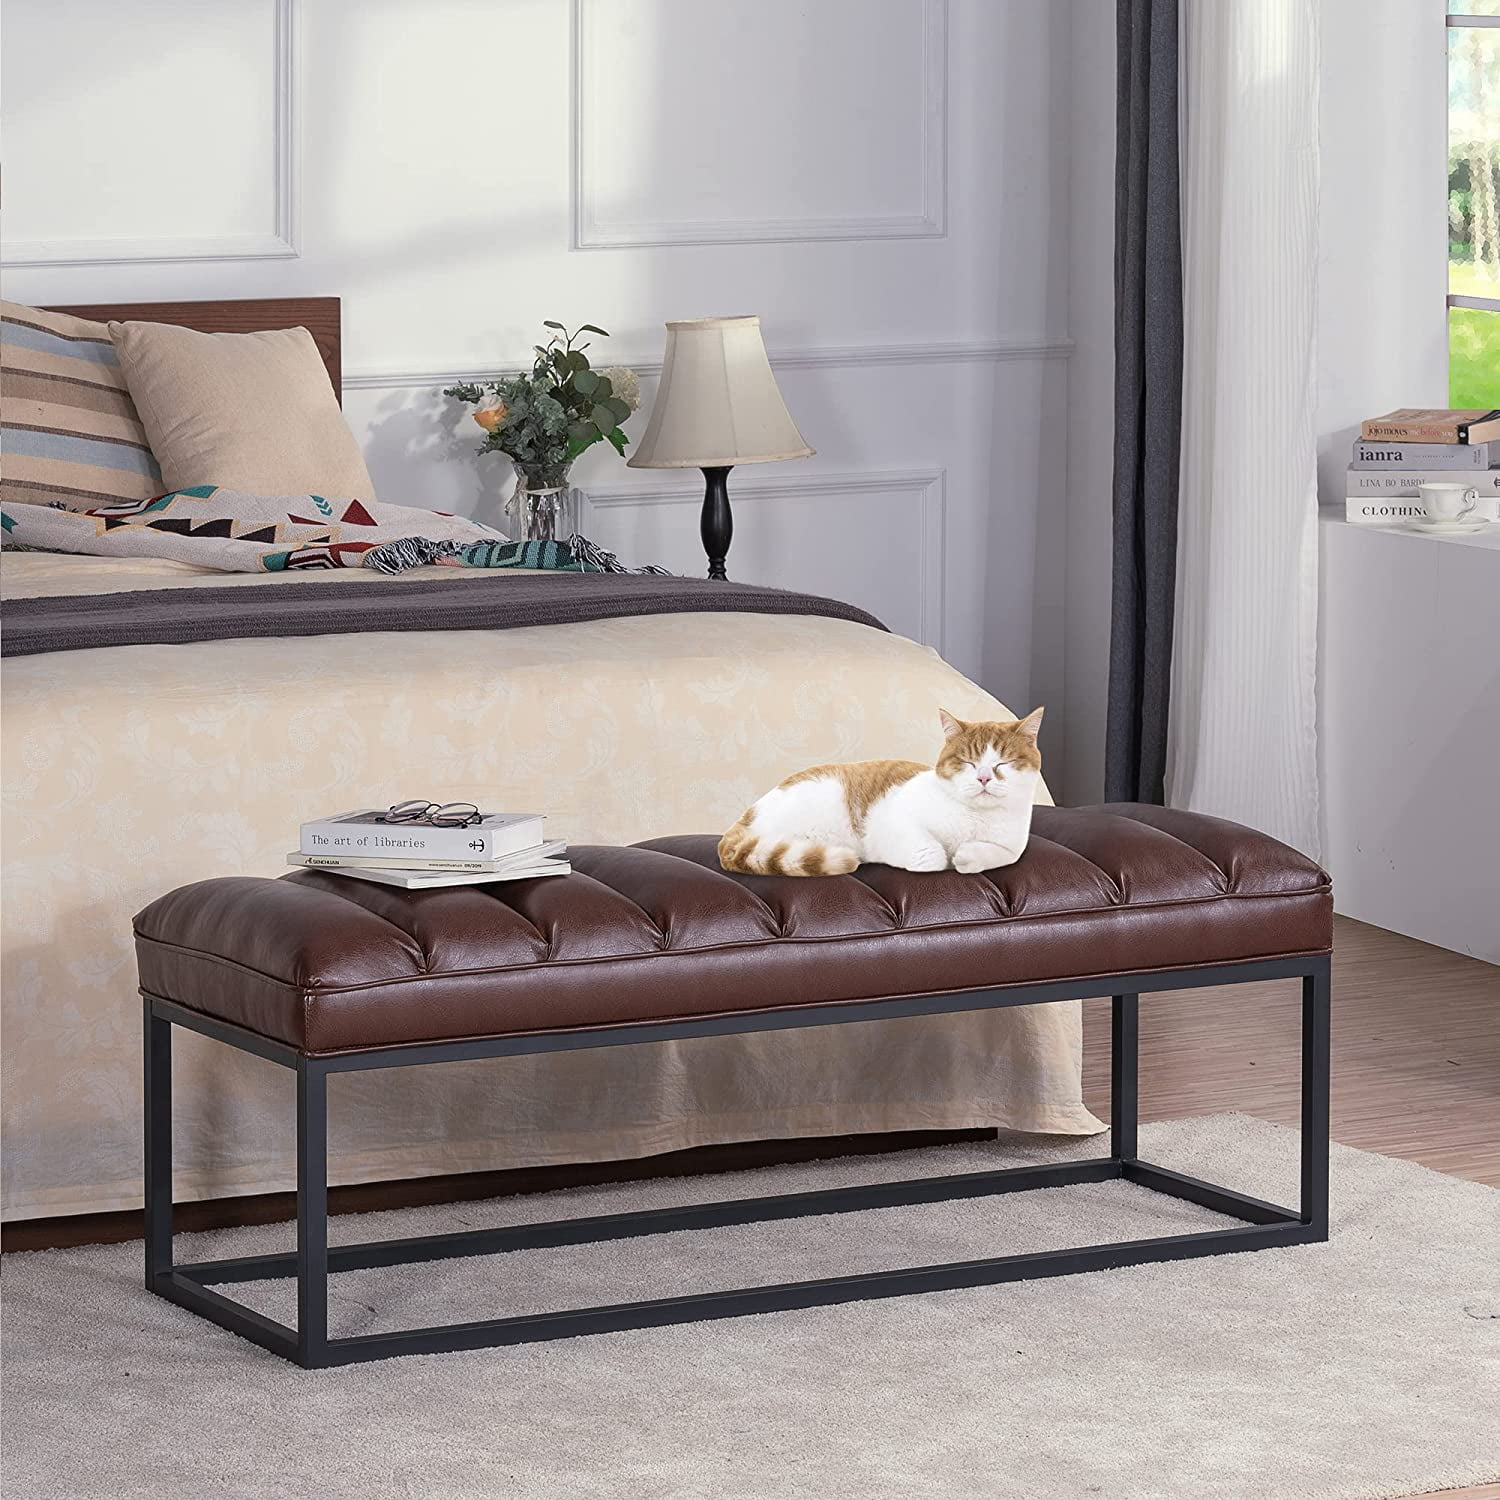 pu leather upholstered bedroom bench end of bed channel tufted window  entryway benches with under storage soft padded living room ottoman bench  foot